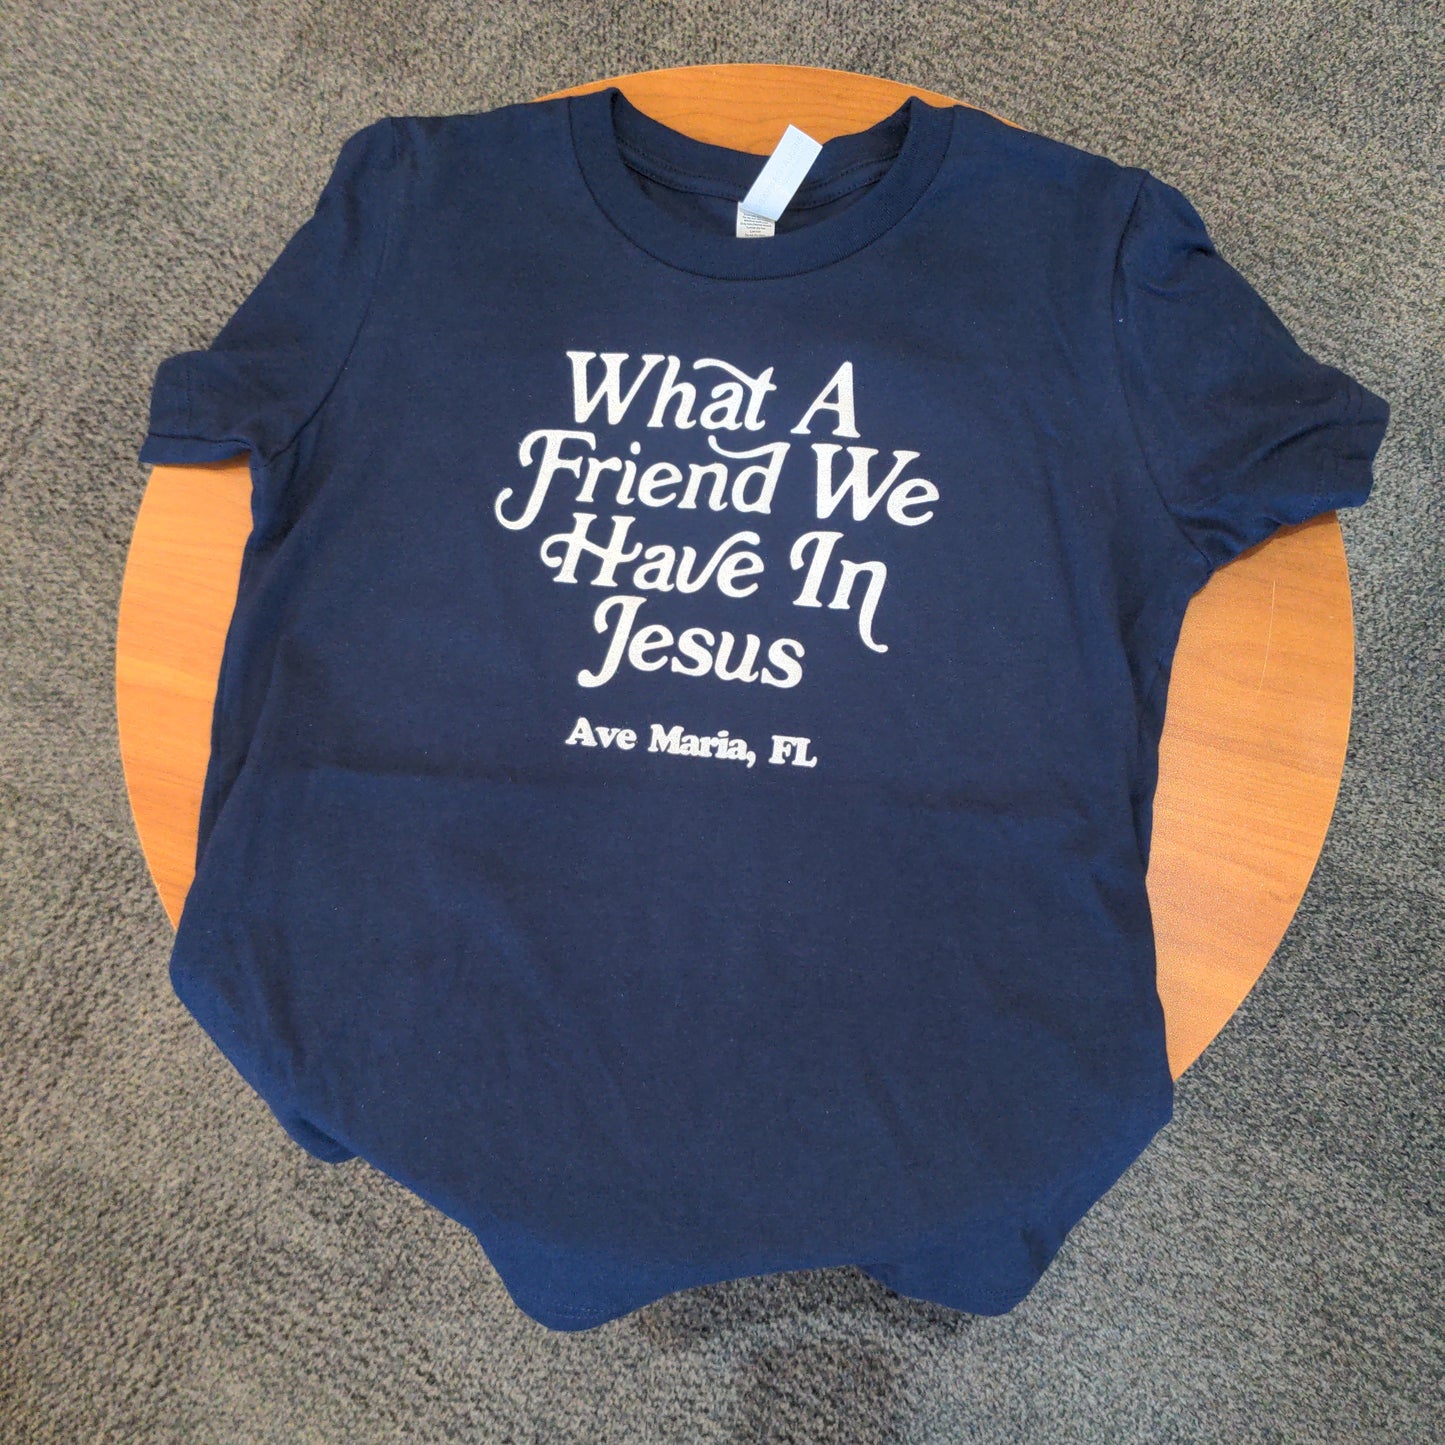 "What A Friend We Have in Jesus" Youth Tee